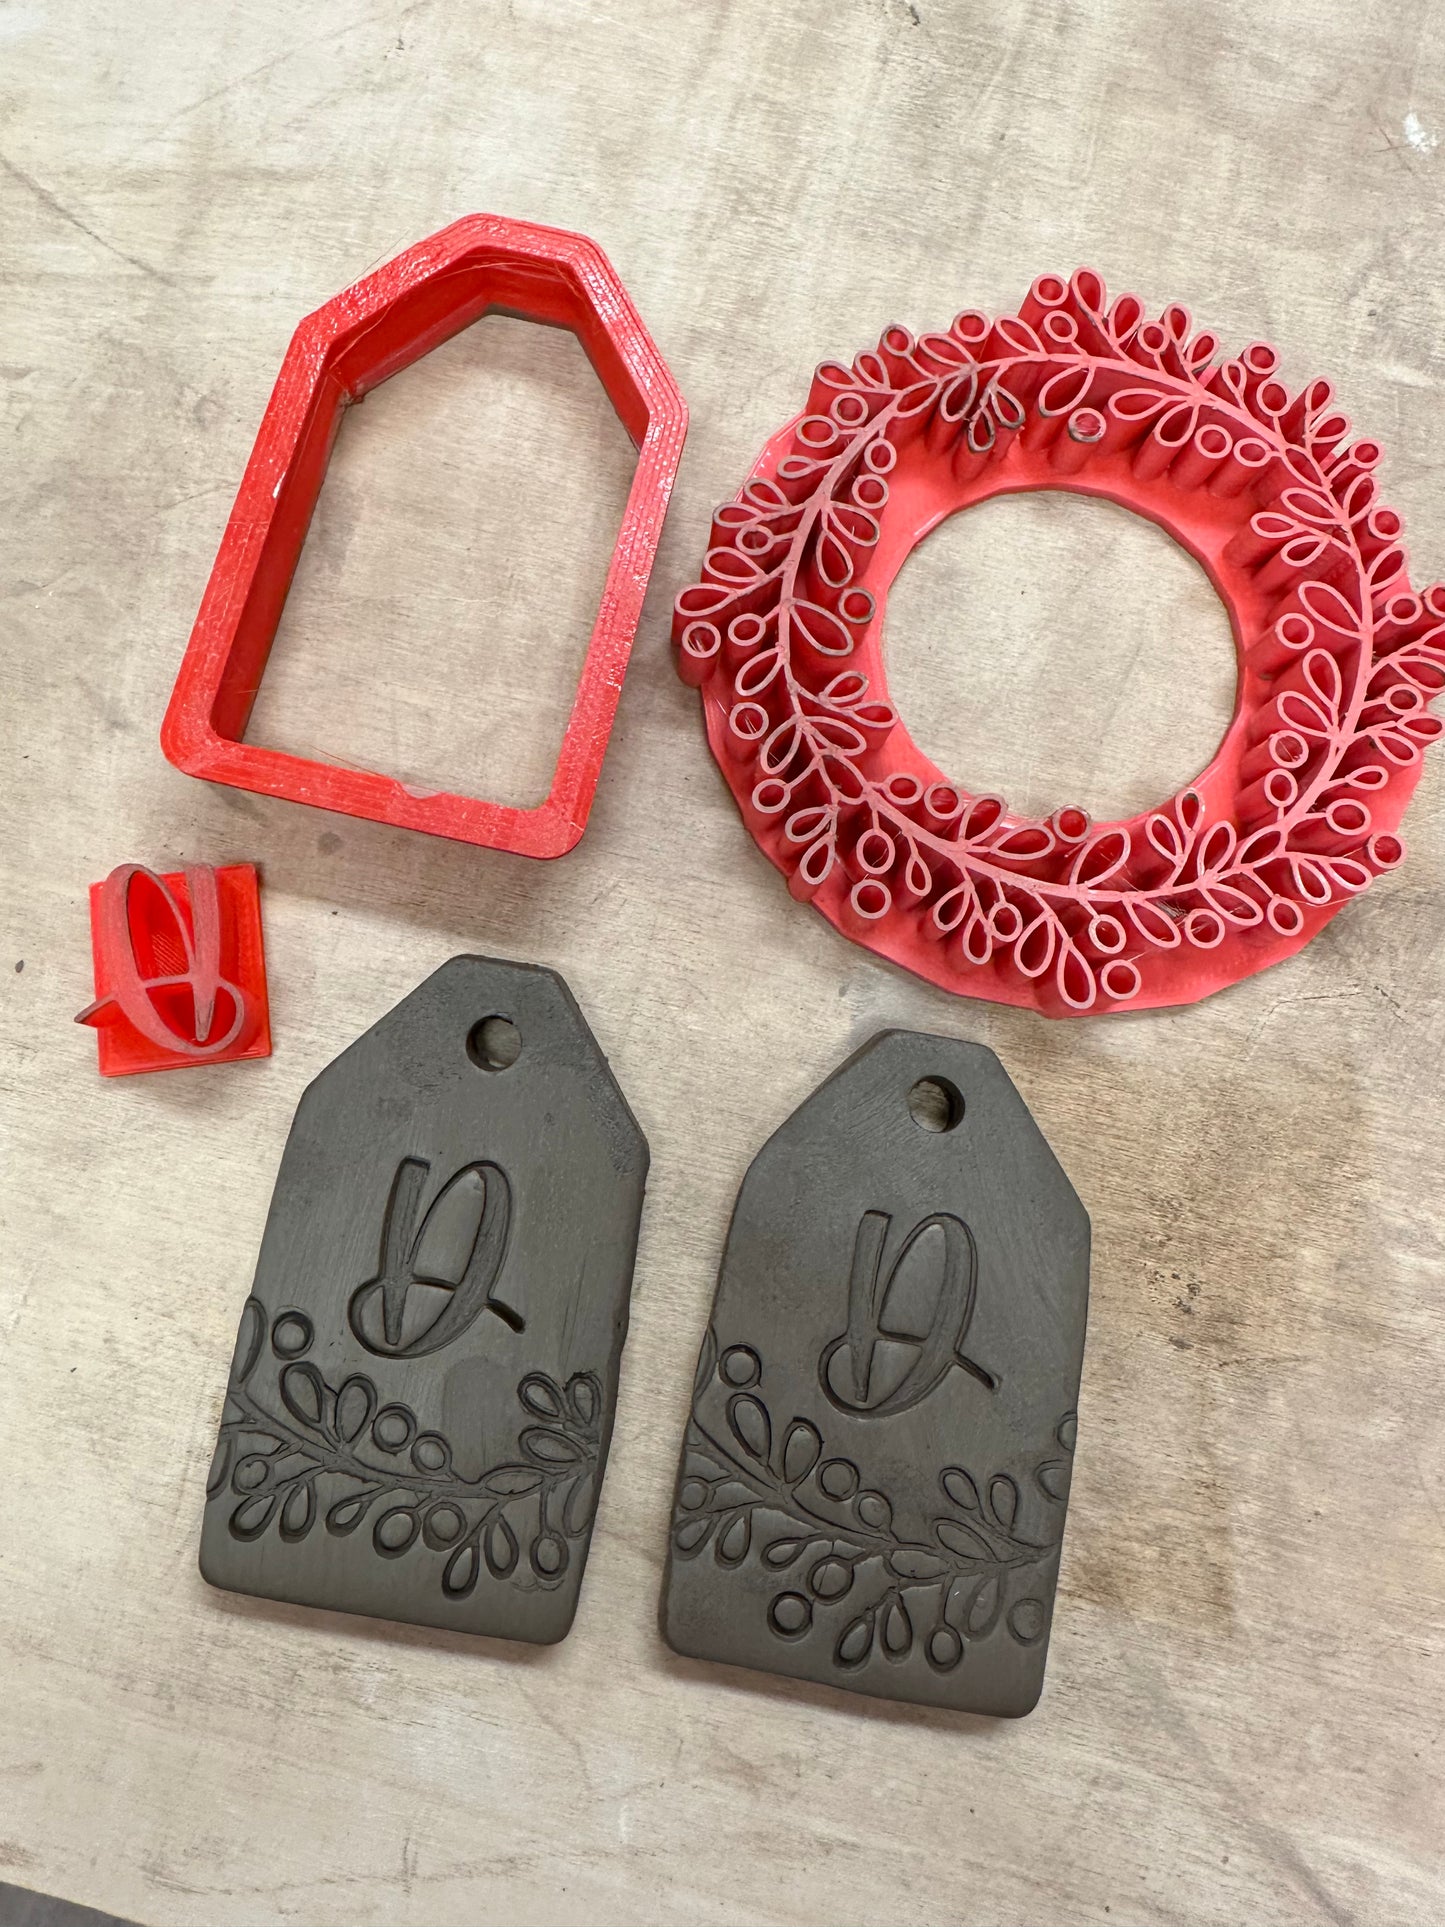 NEW Tag and Plaque Cutter Designs - Plastic 3D Printed, set or each